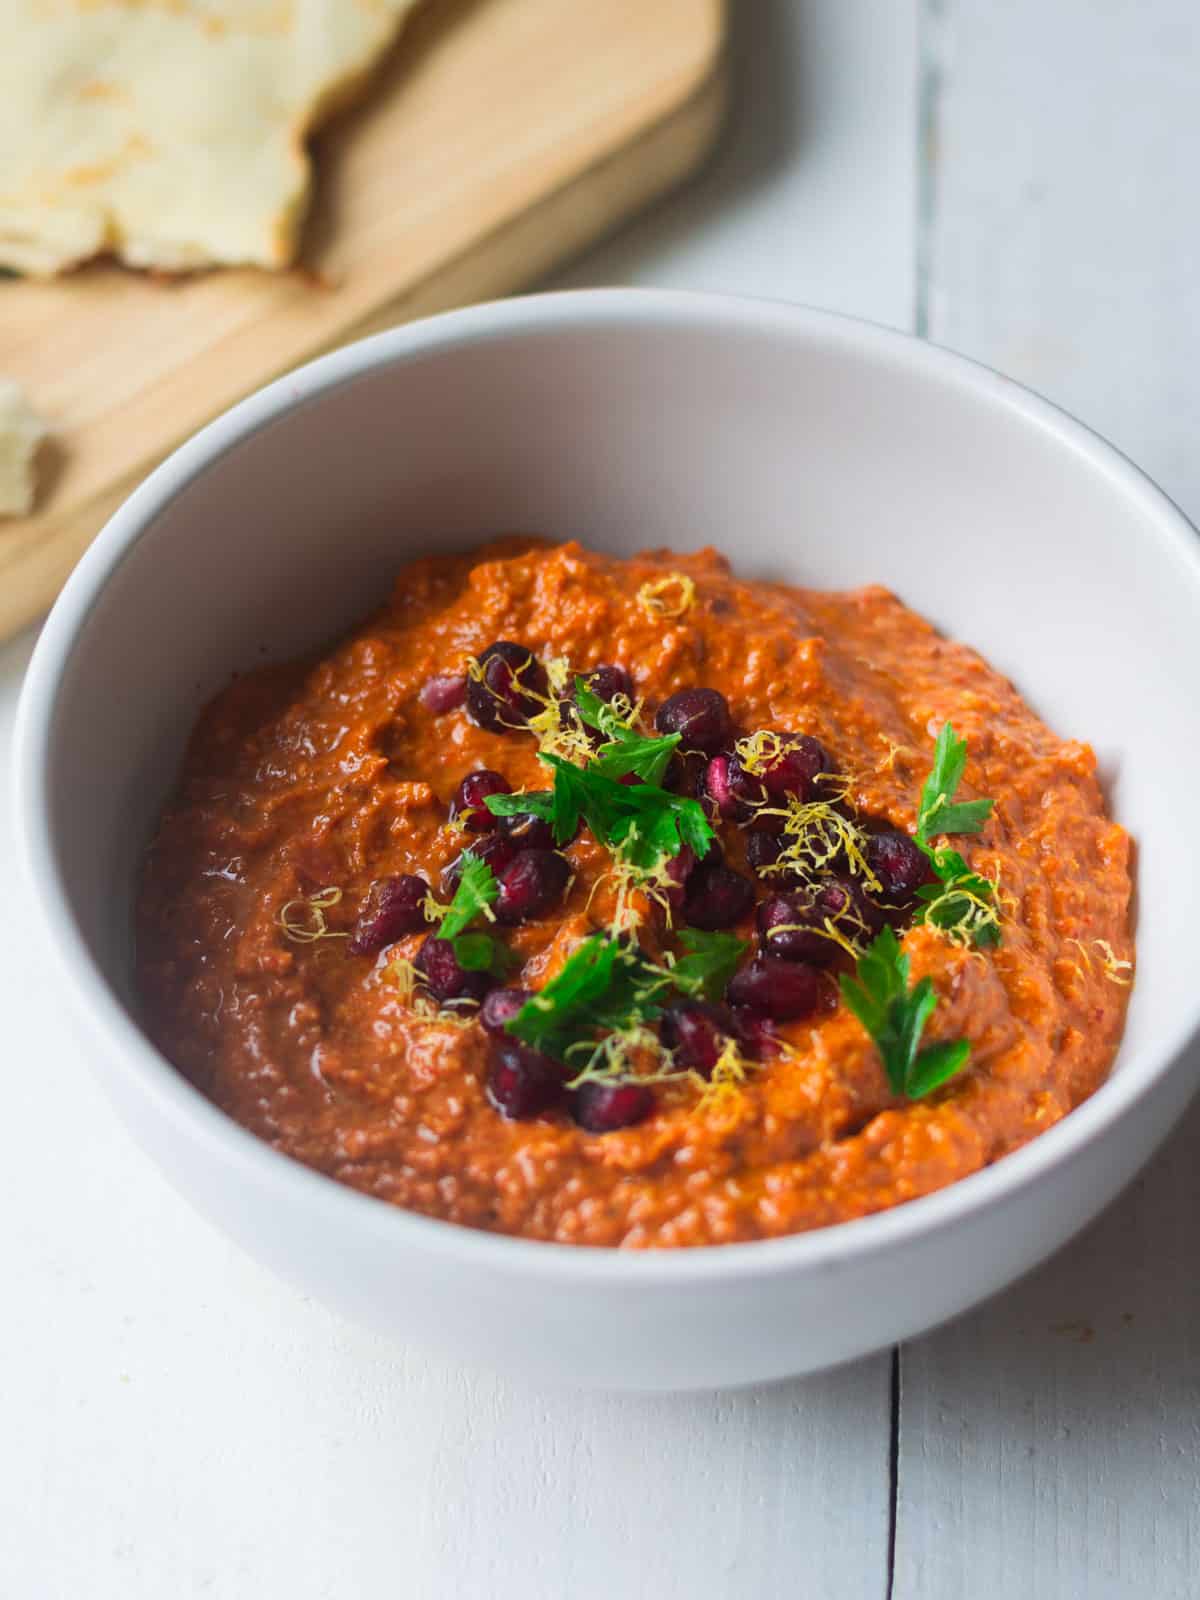 Turkish red pepper and walnut dip with pomegranate molasses, warm spices and garnished with lemon zest.